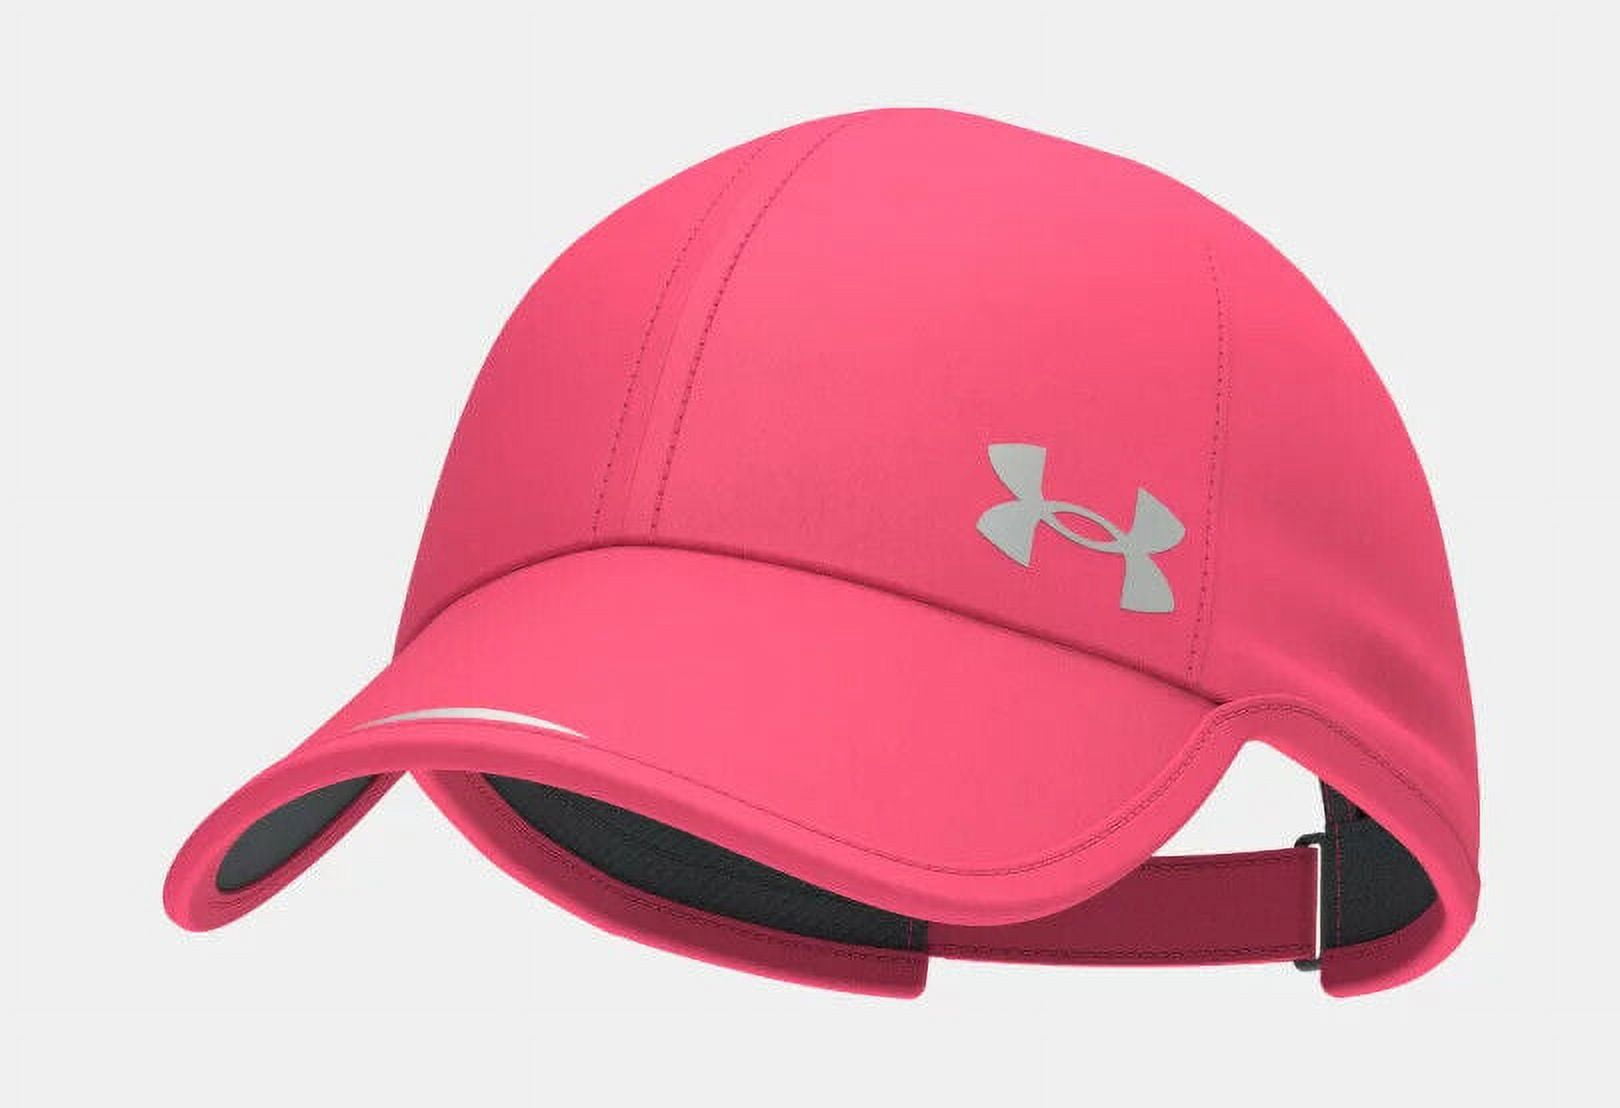 Under Armour Women's UA Iso-Chill Launch Run Hat 1361542-683 Pink Shock OSFM